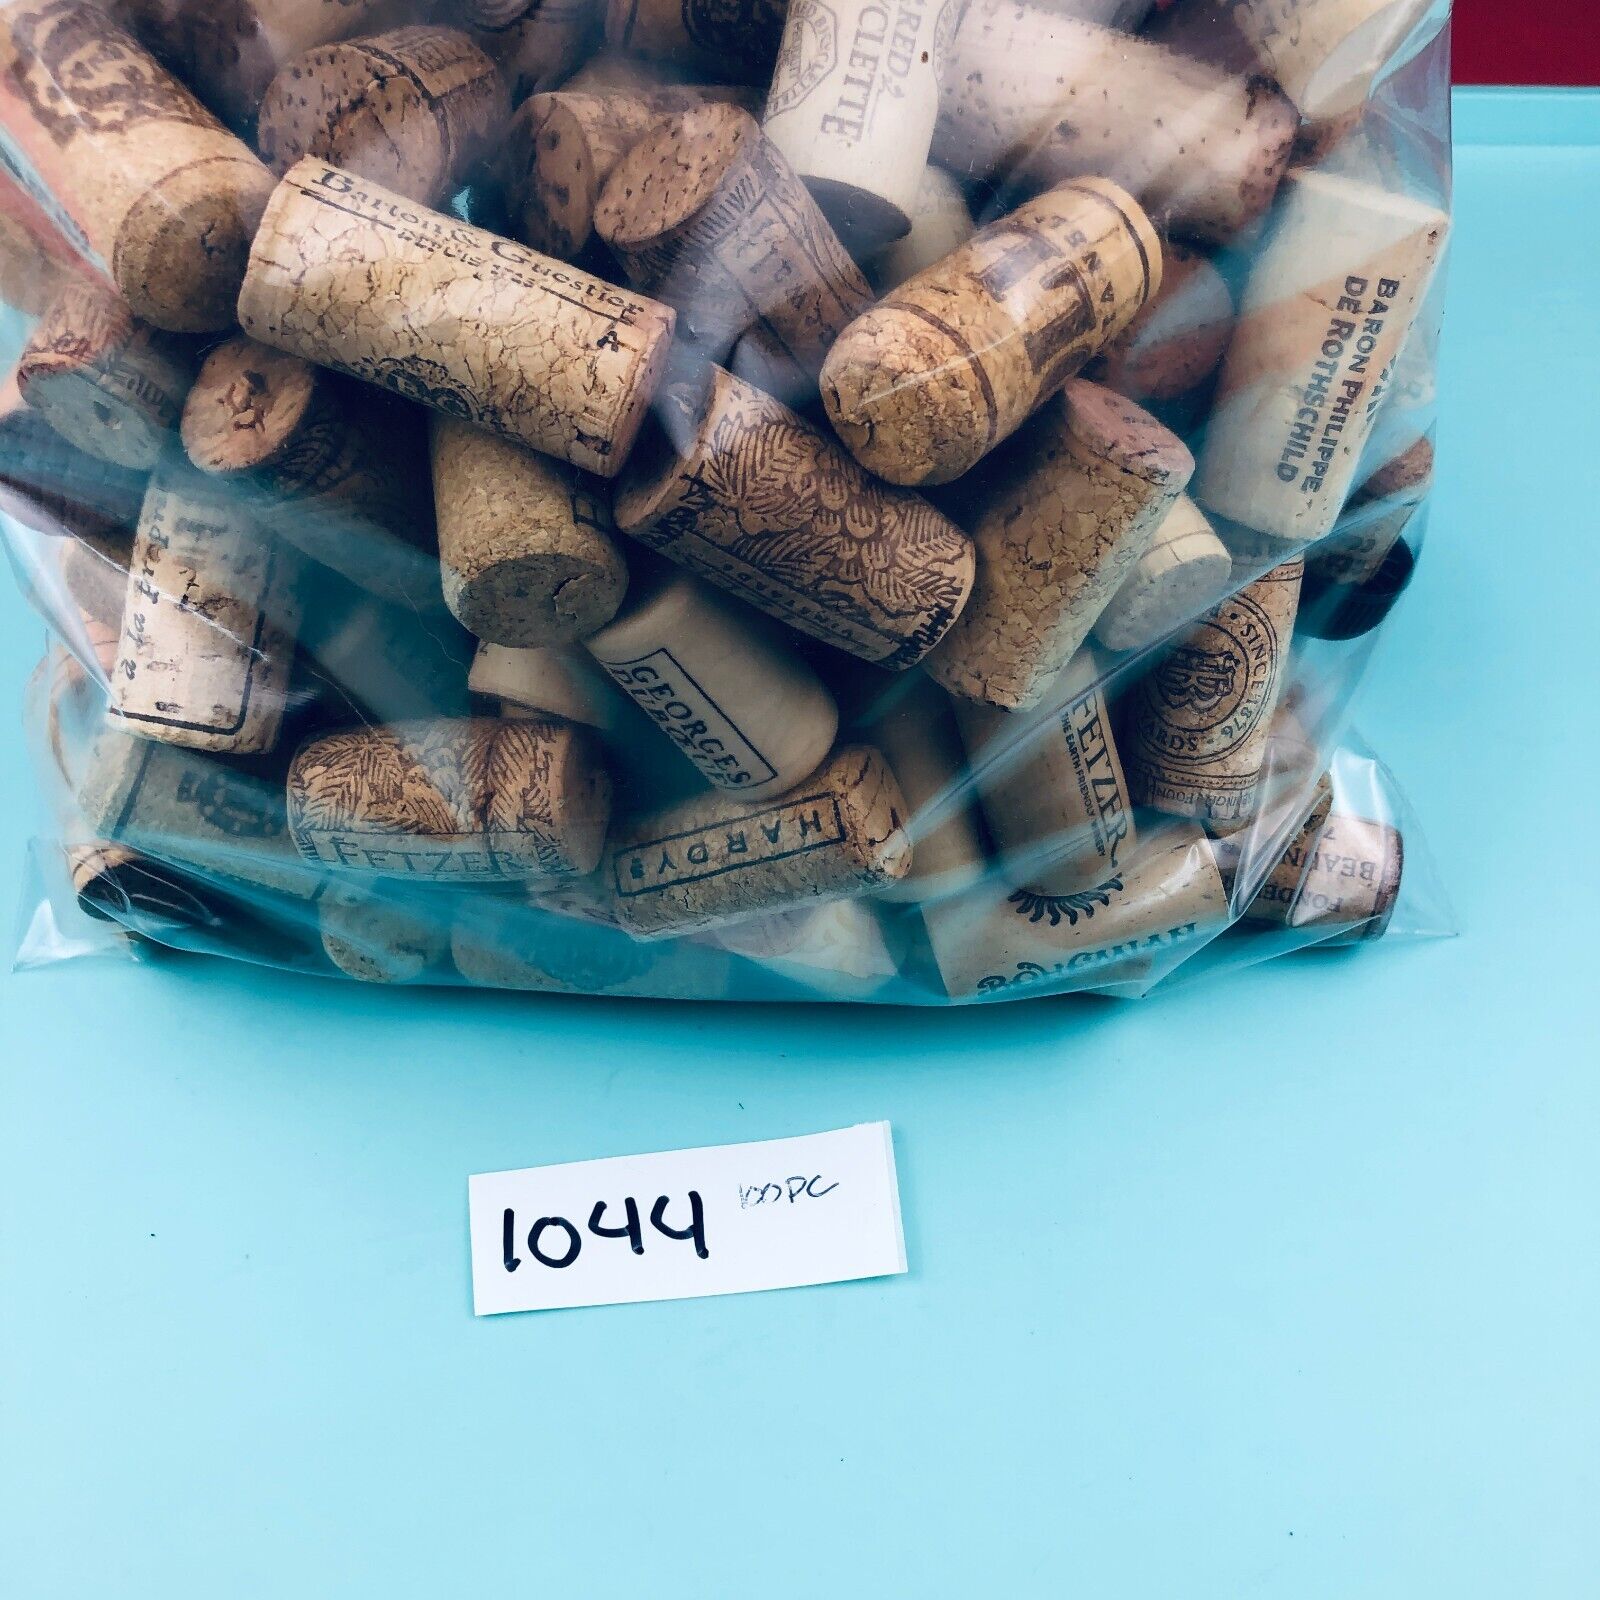 100 Used Natural Wine Corks, No Synthetic, No Champagne, Great For Crafts